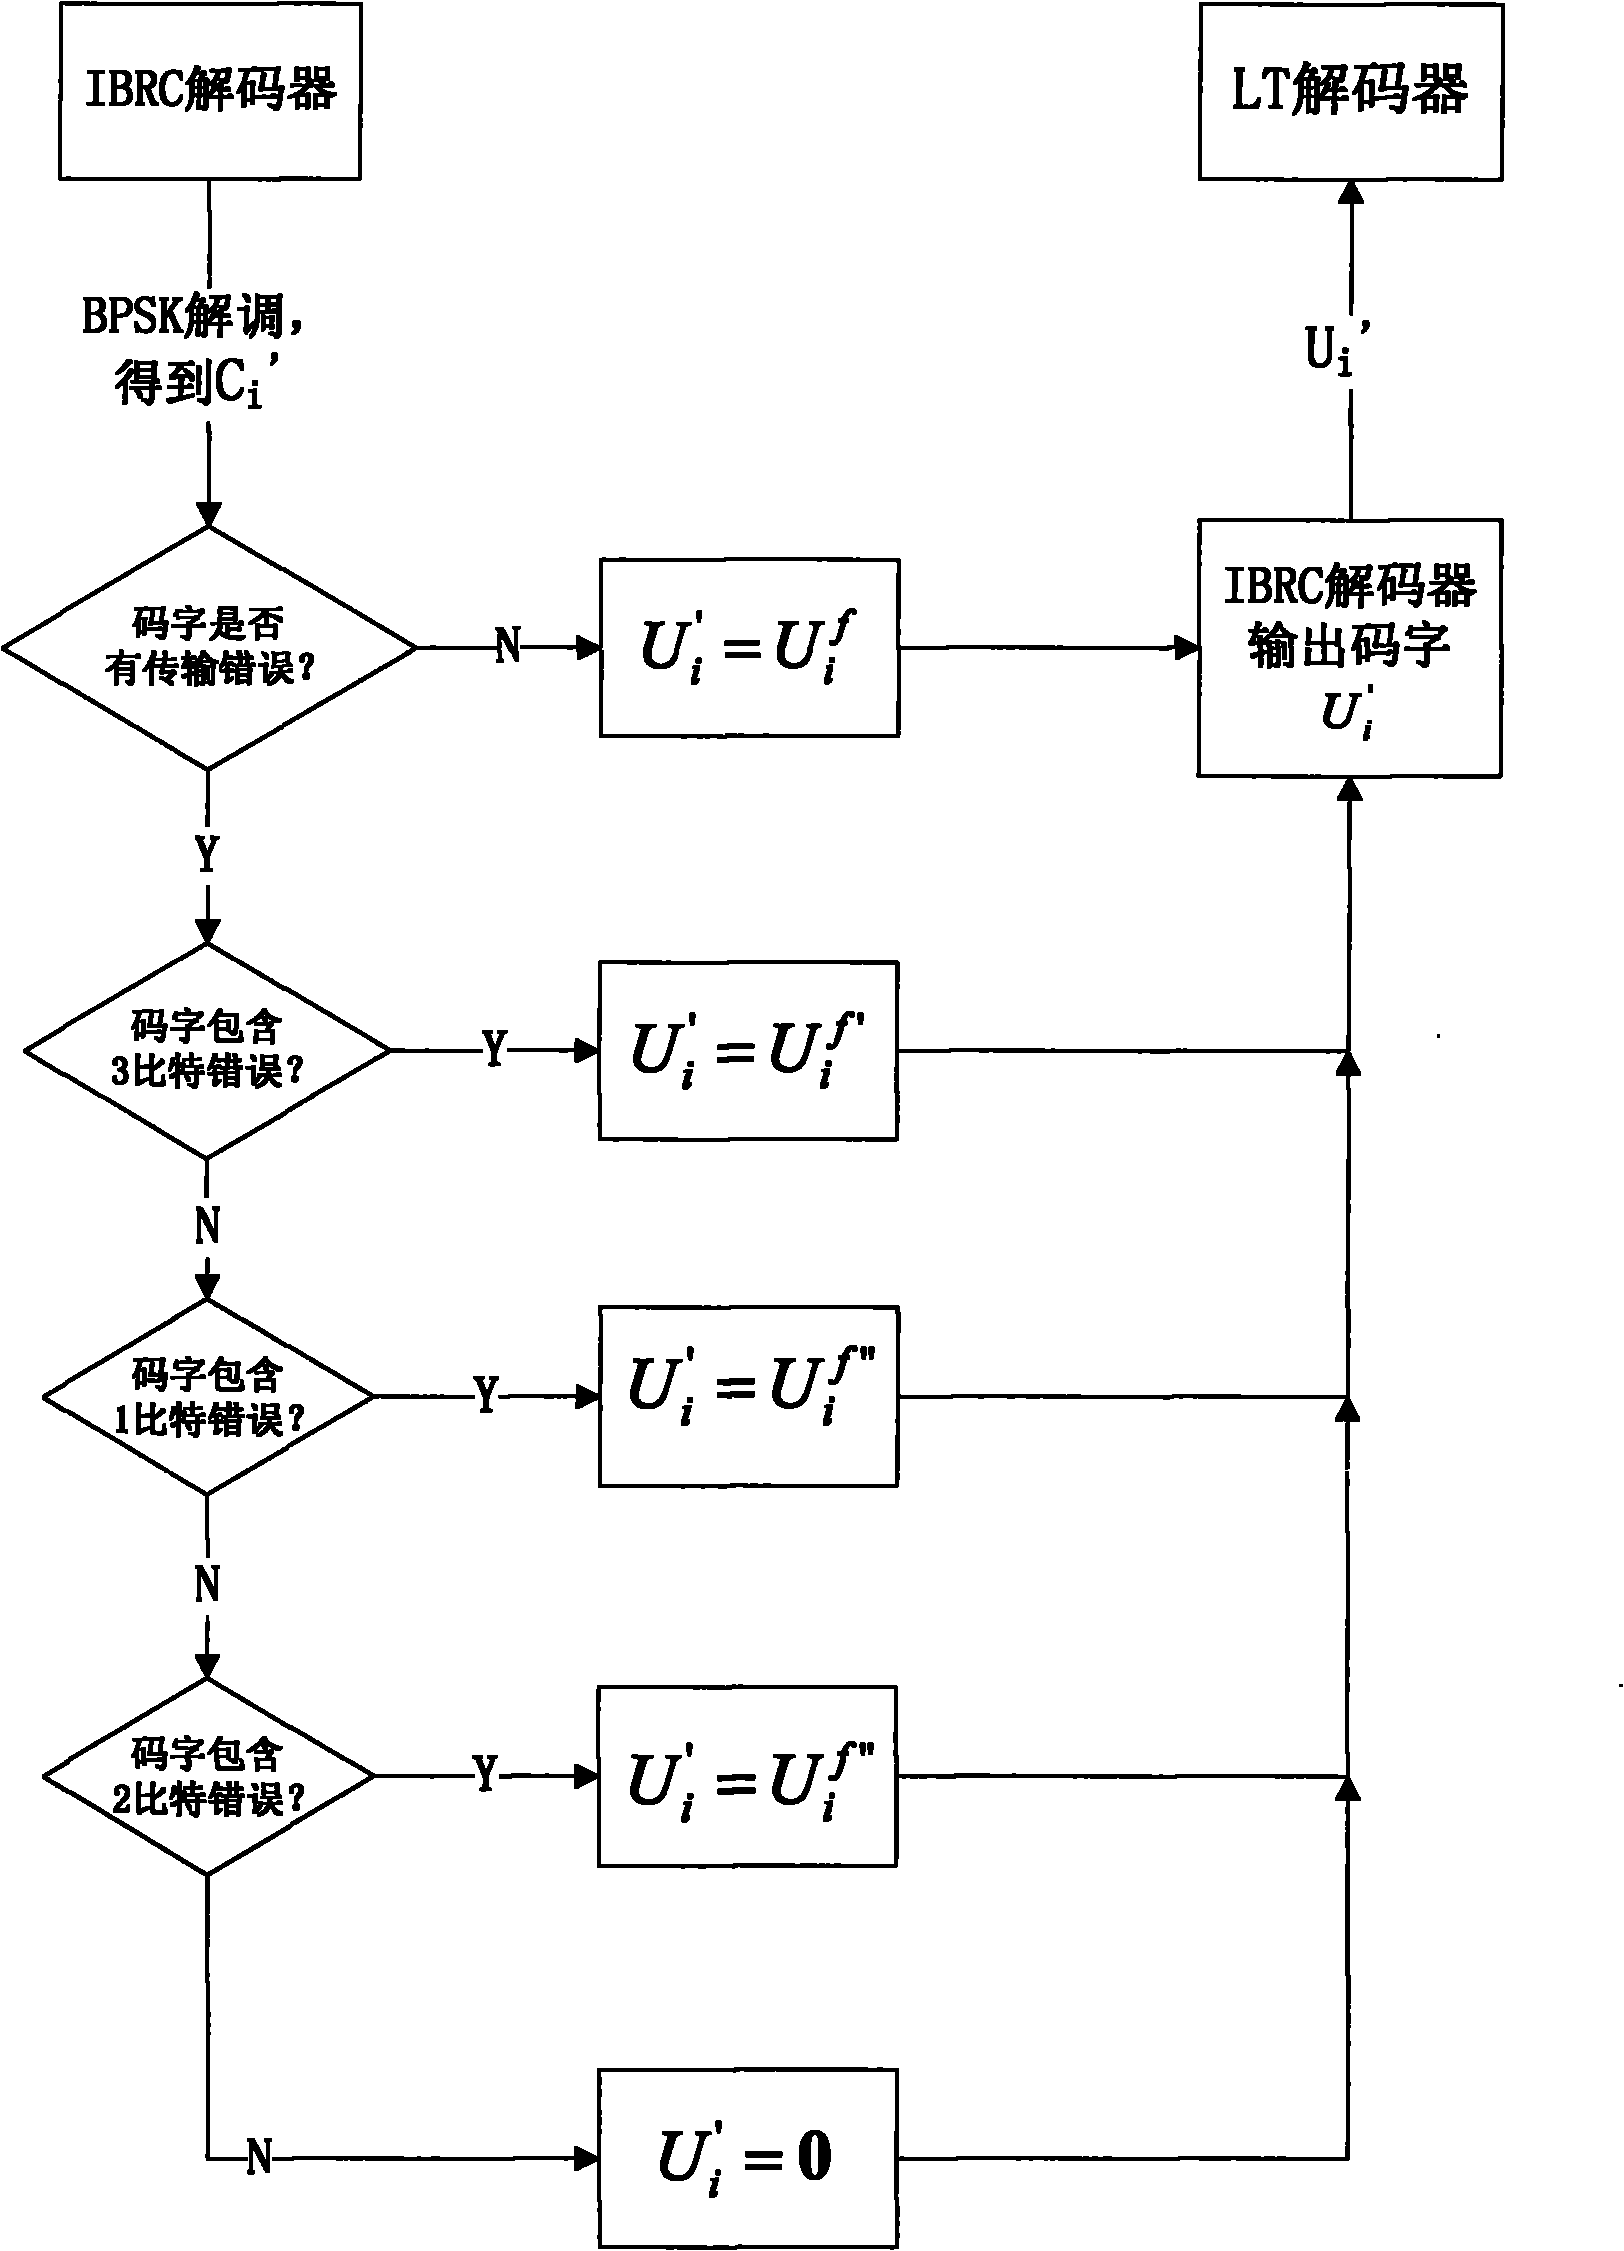 Channel coding method for enhancing transmission quality of fountain code on wireless channel